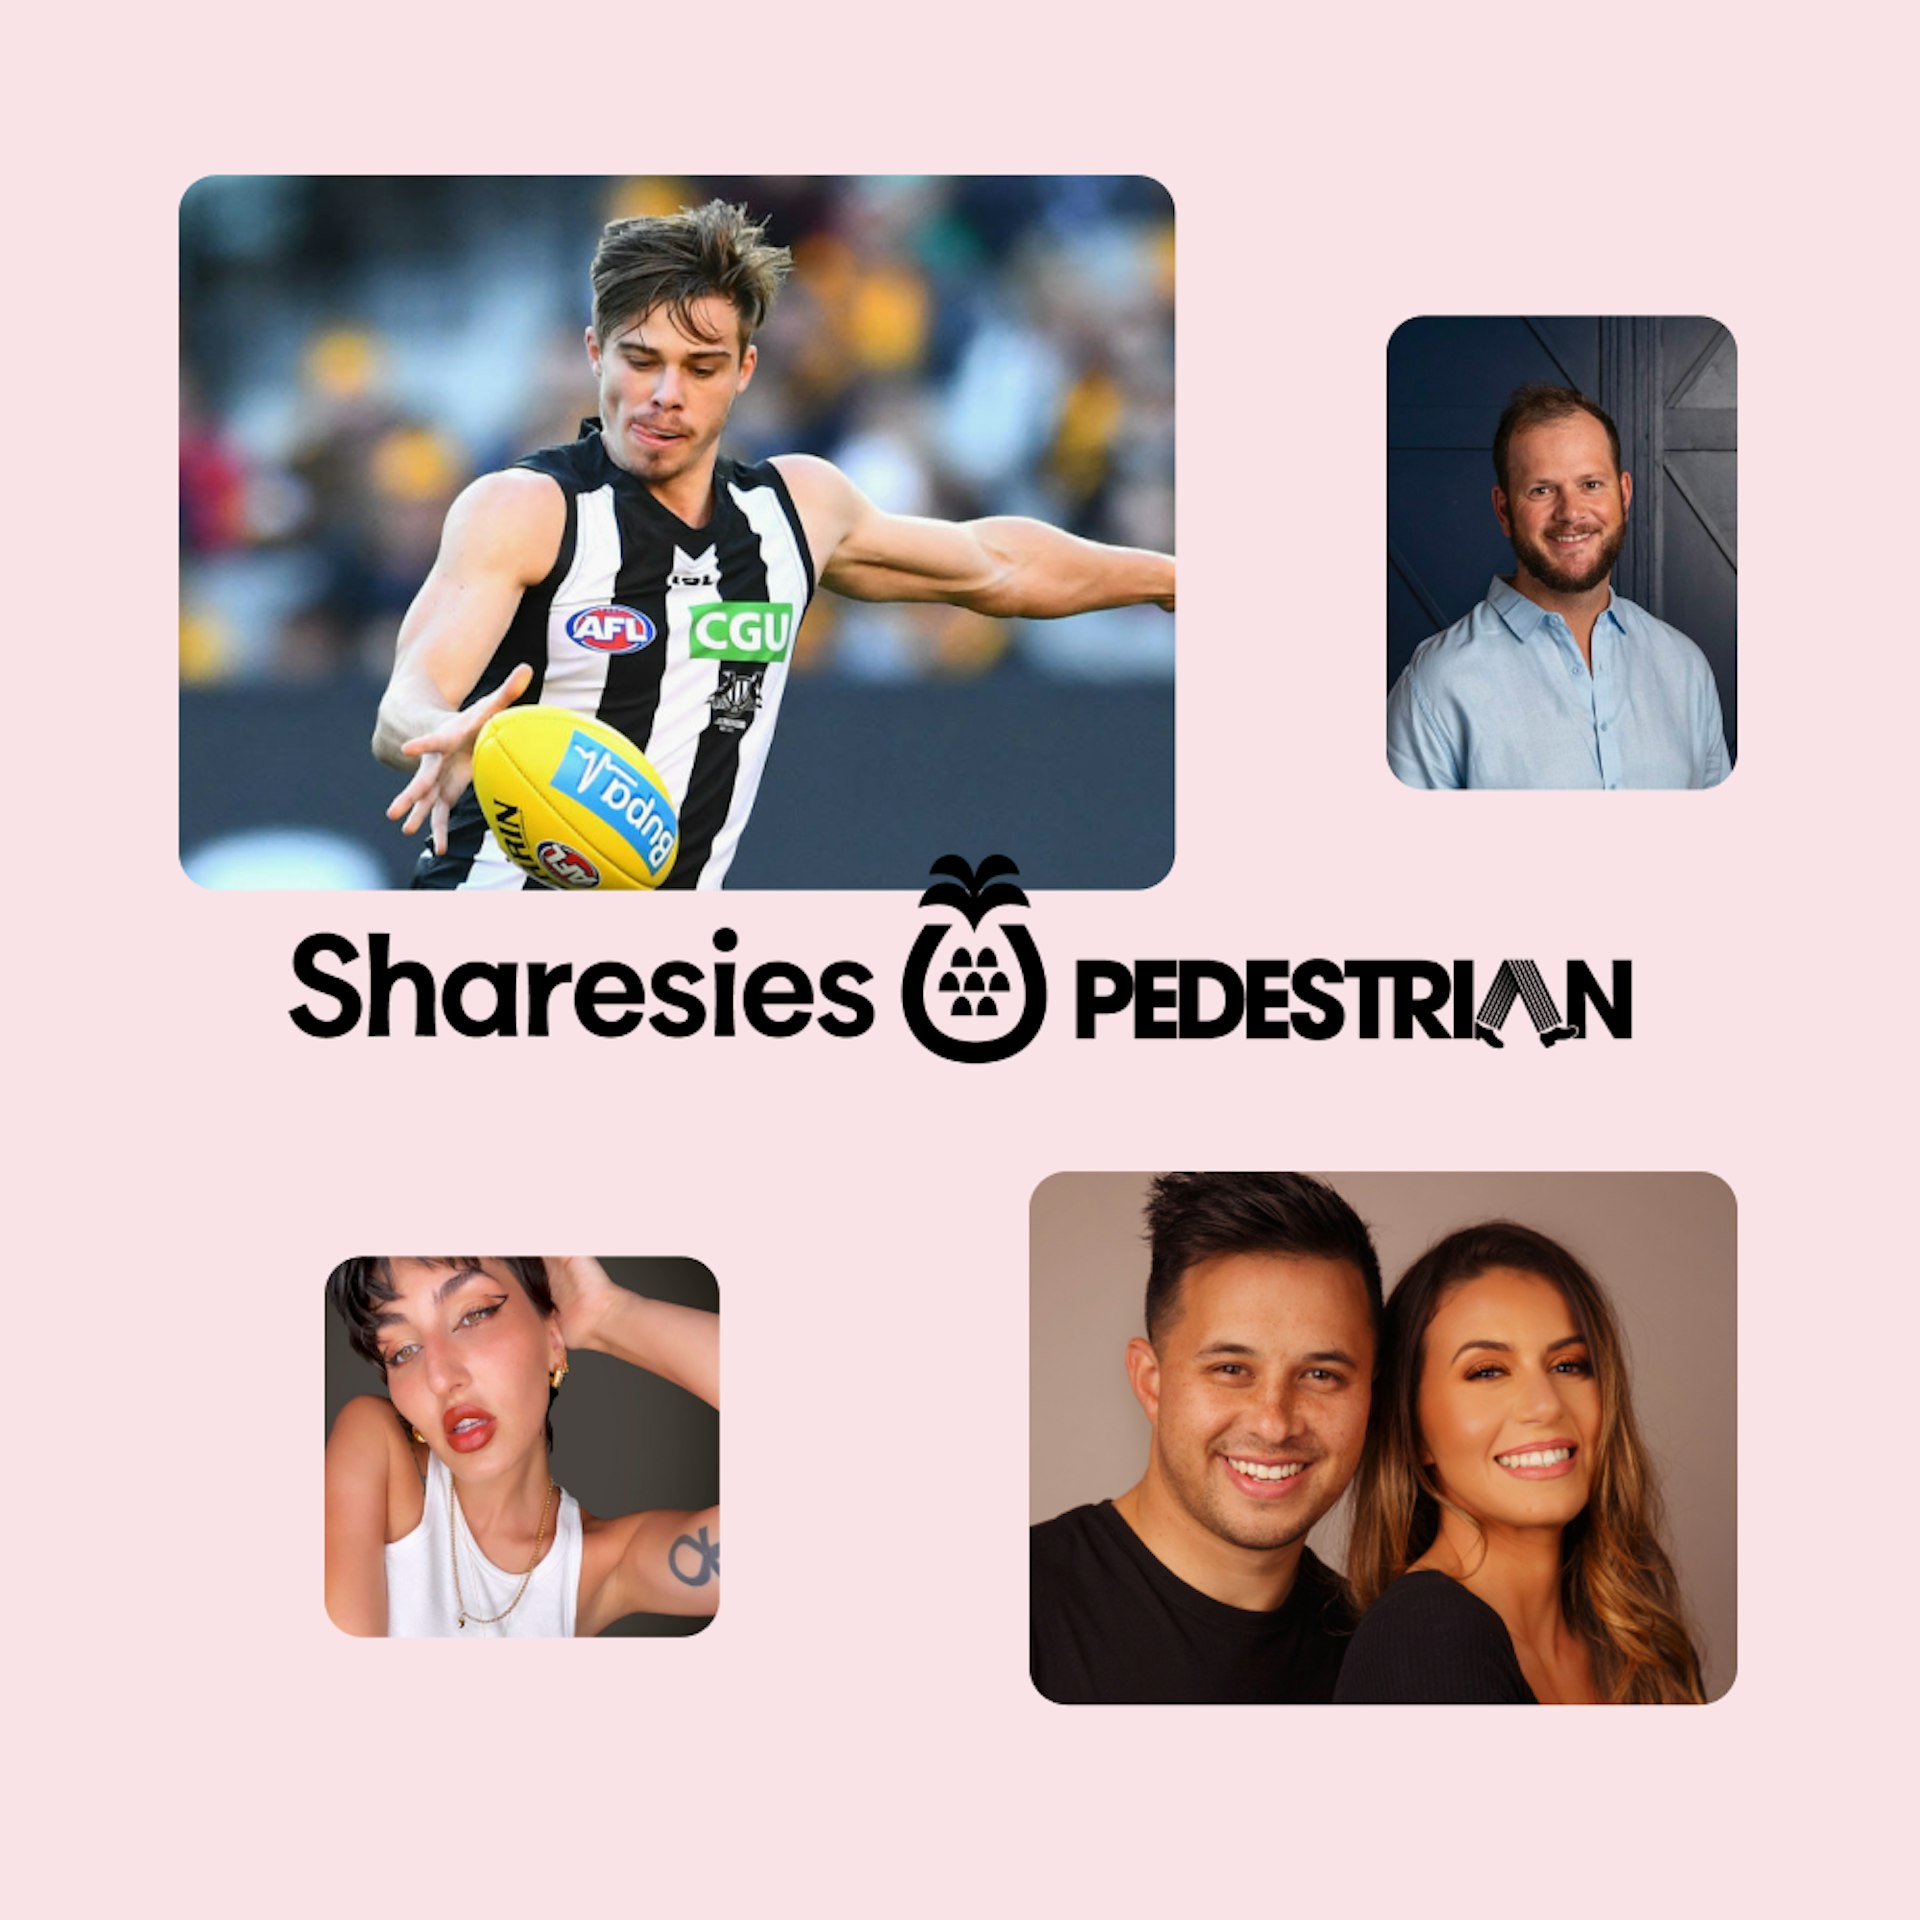 Four images of people against a pink background, with the Sharesies and Pedestrian names coloured black in the middle of the image. The top right image is a man wearing a blue shirt smiling into the camera, bottom left is a man and women wearing black and smiling, bottom left is a person wearing a white singlet and posing for the camera, and the top left image is an AFL player kicking a ball during a game.  